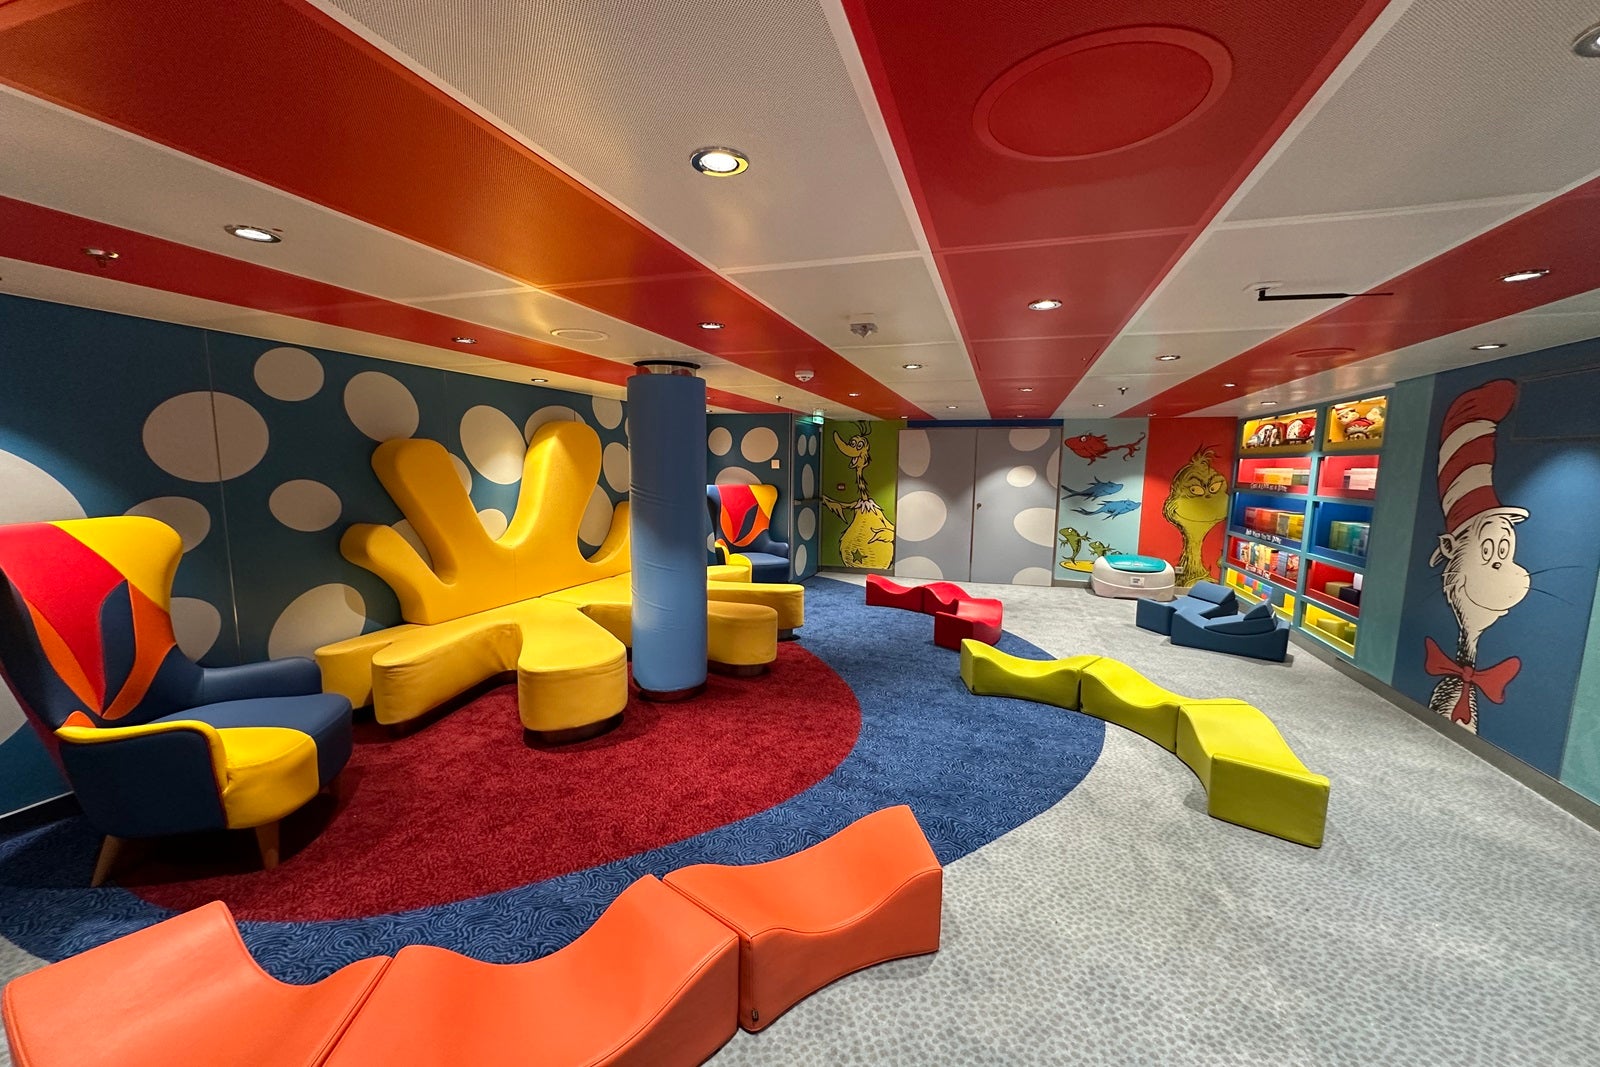 A colorful room with bright red, blue, orange and yellow furniture, murals of Dr. Seuss characters and bookshelves